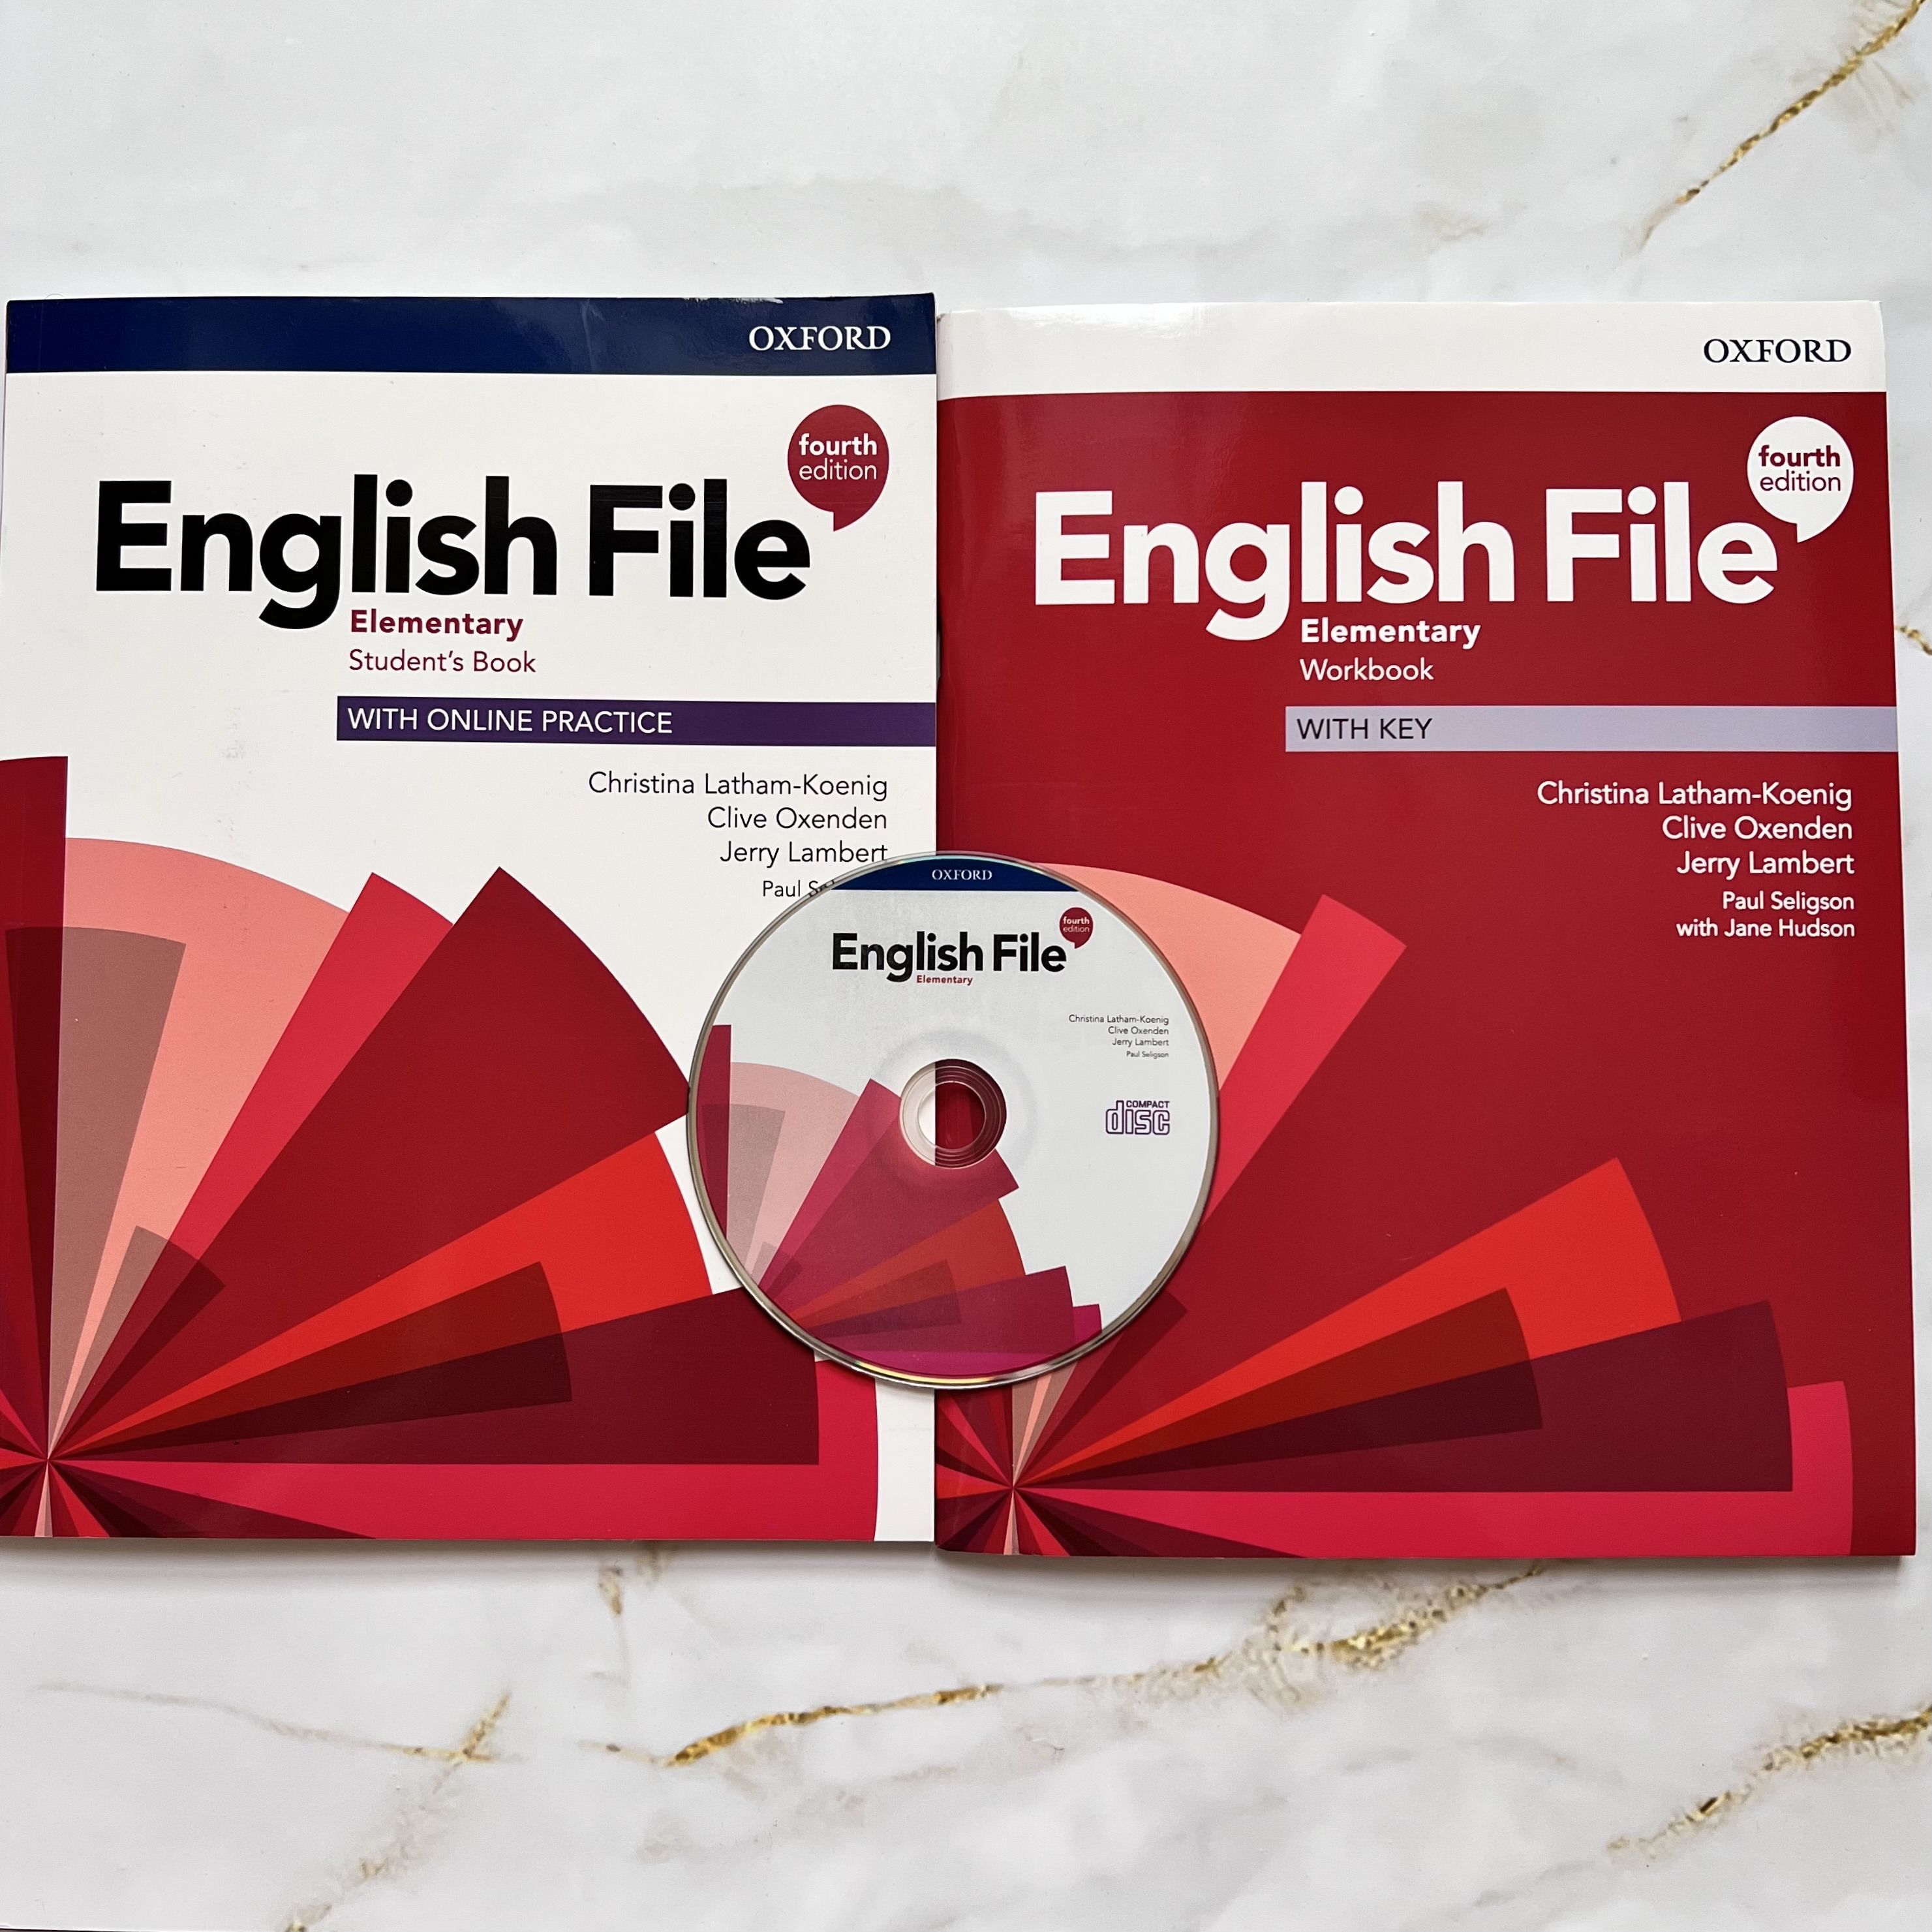 English file Elementary 4th Edition уровень. English file Elementary 4th. Учебник английского элементари Оксфорд. English file Elementary 4th Edition. English file elementary 4